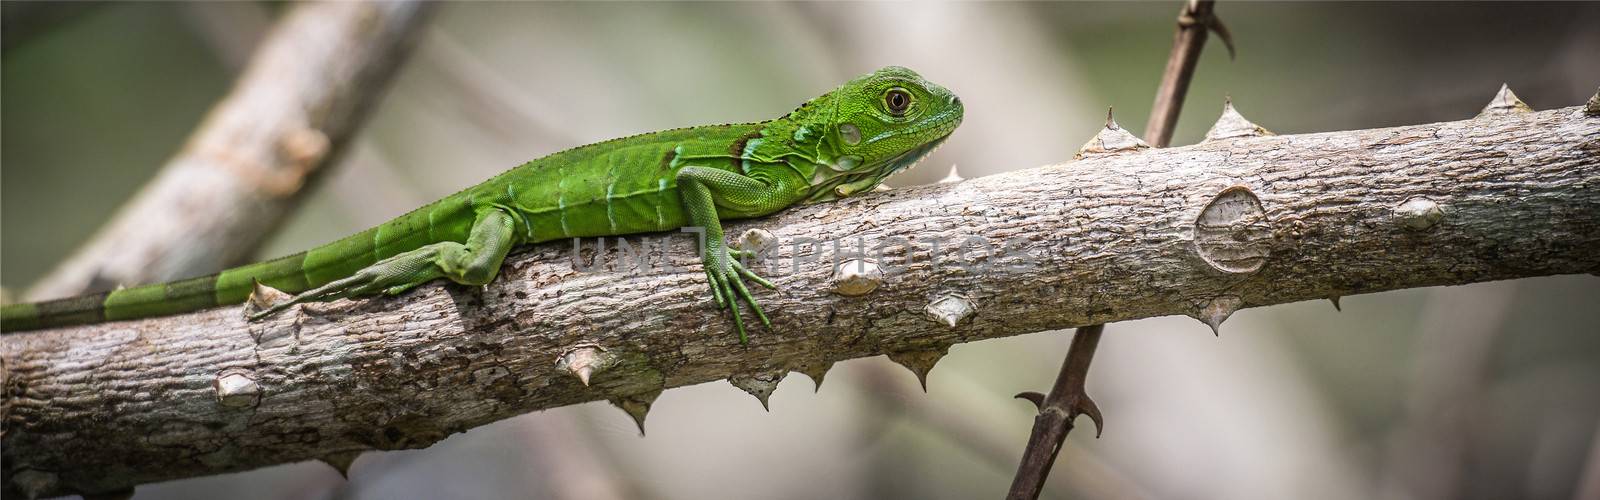 Panoramic of an iguana on a branch of tree